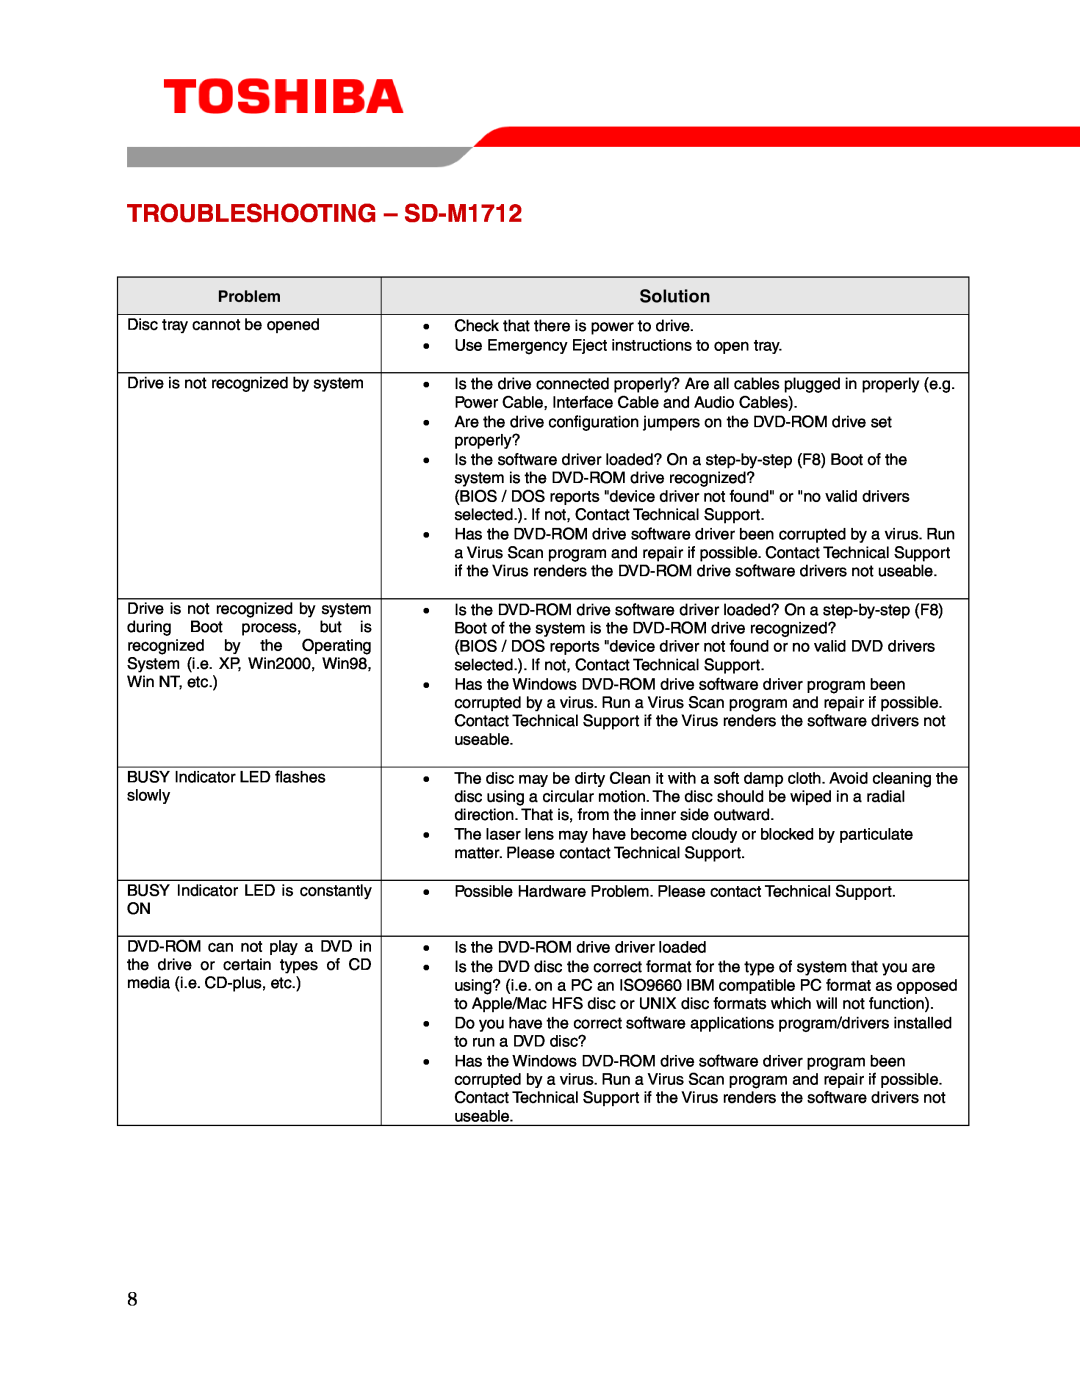 Toshiba user manual TROUBLESHOOTING - SD-M1712, Solution, Problem 